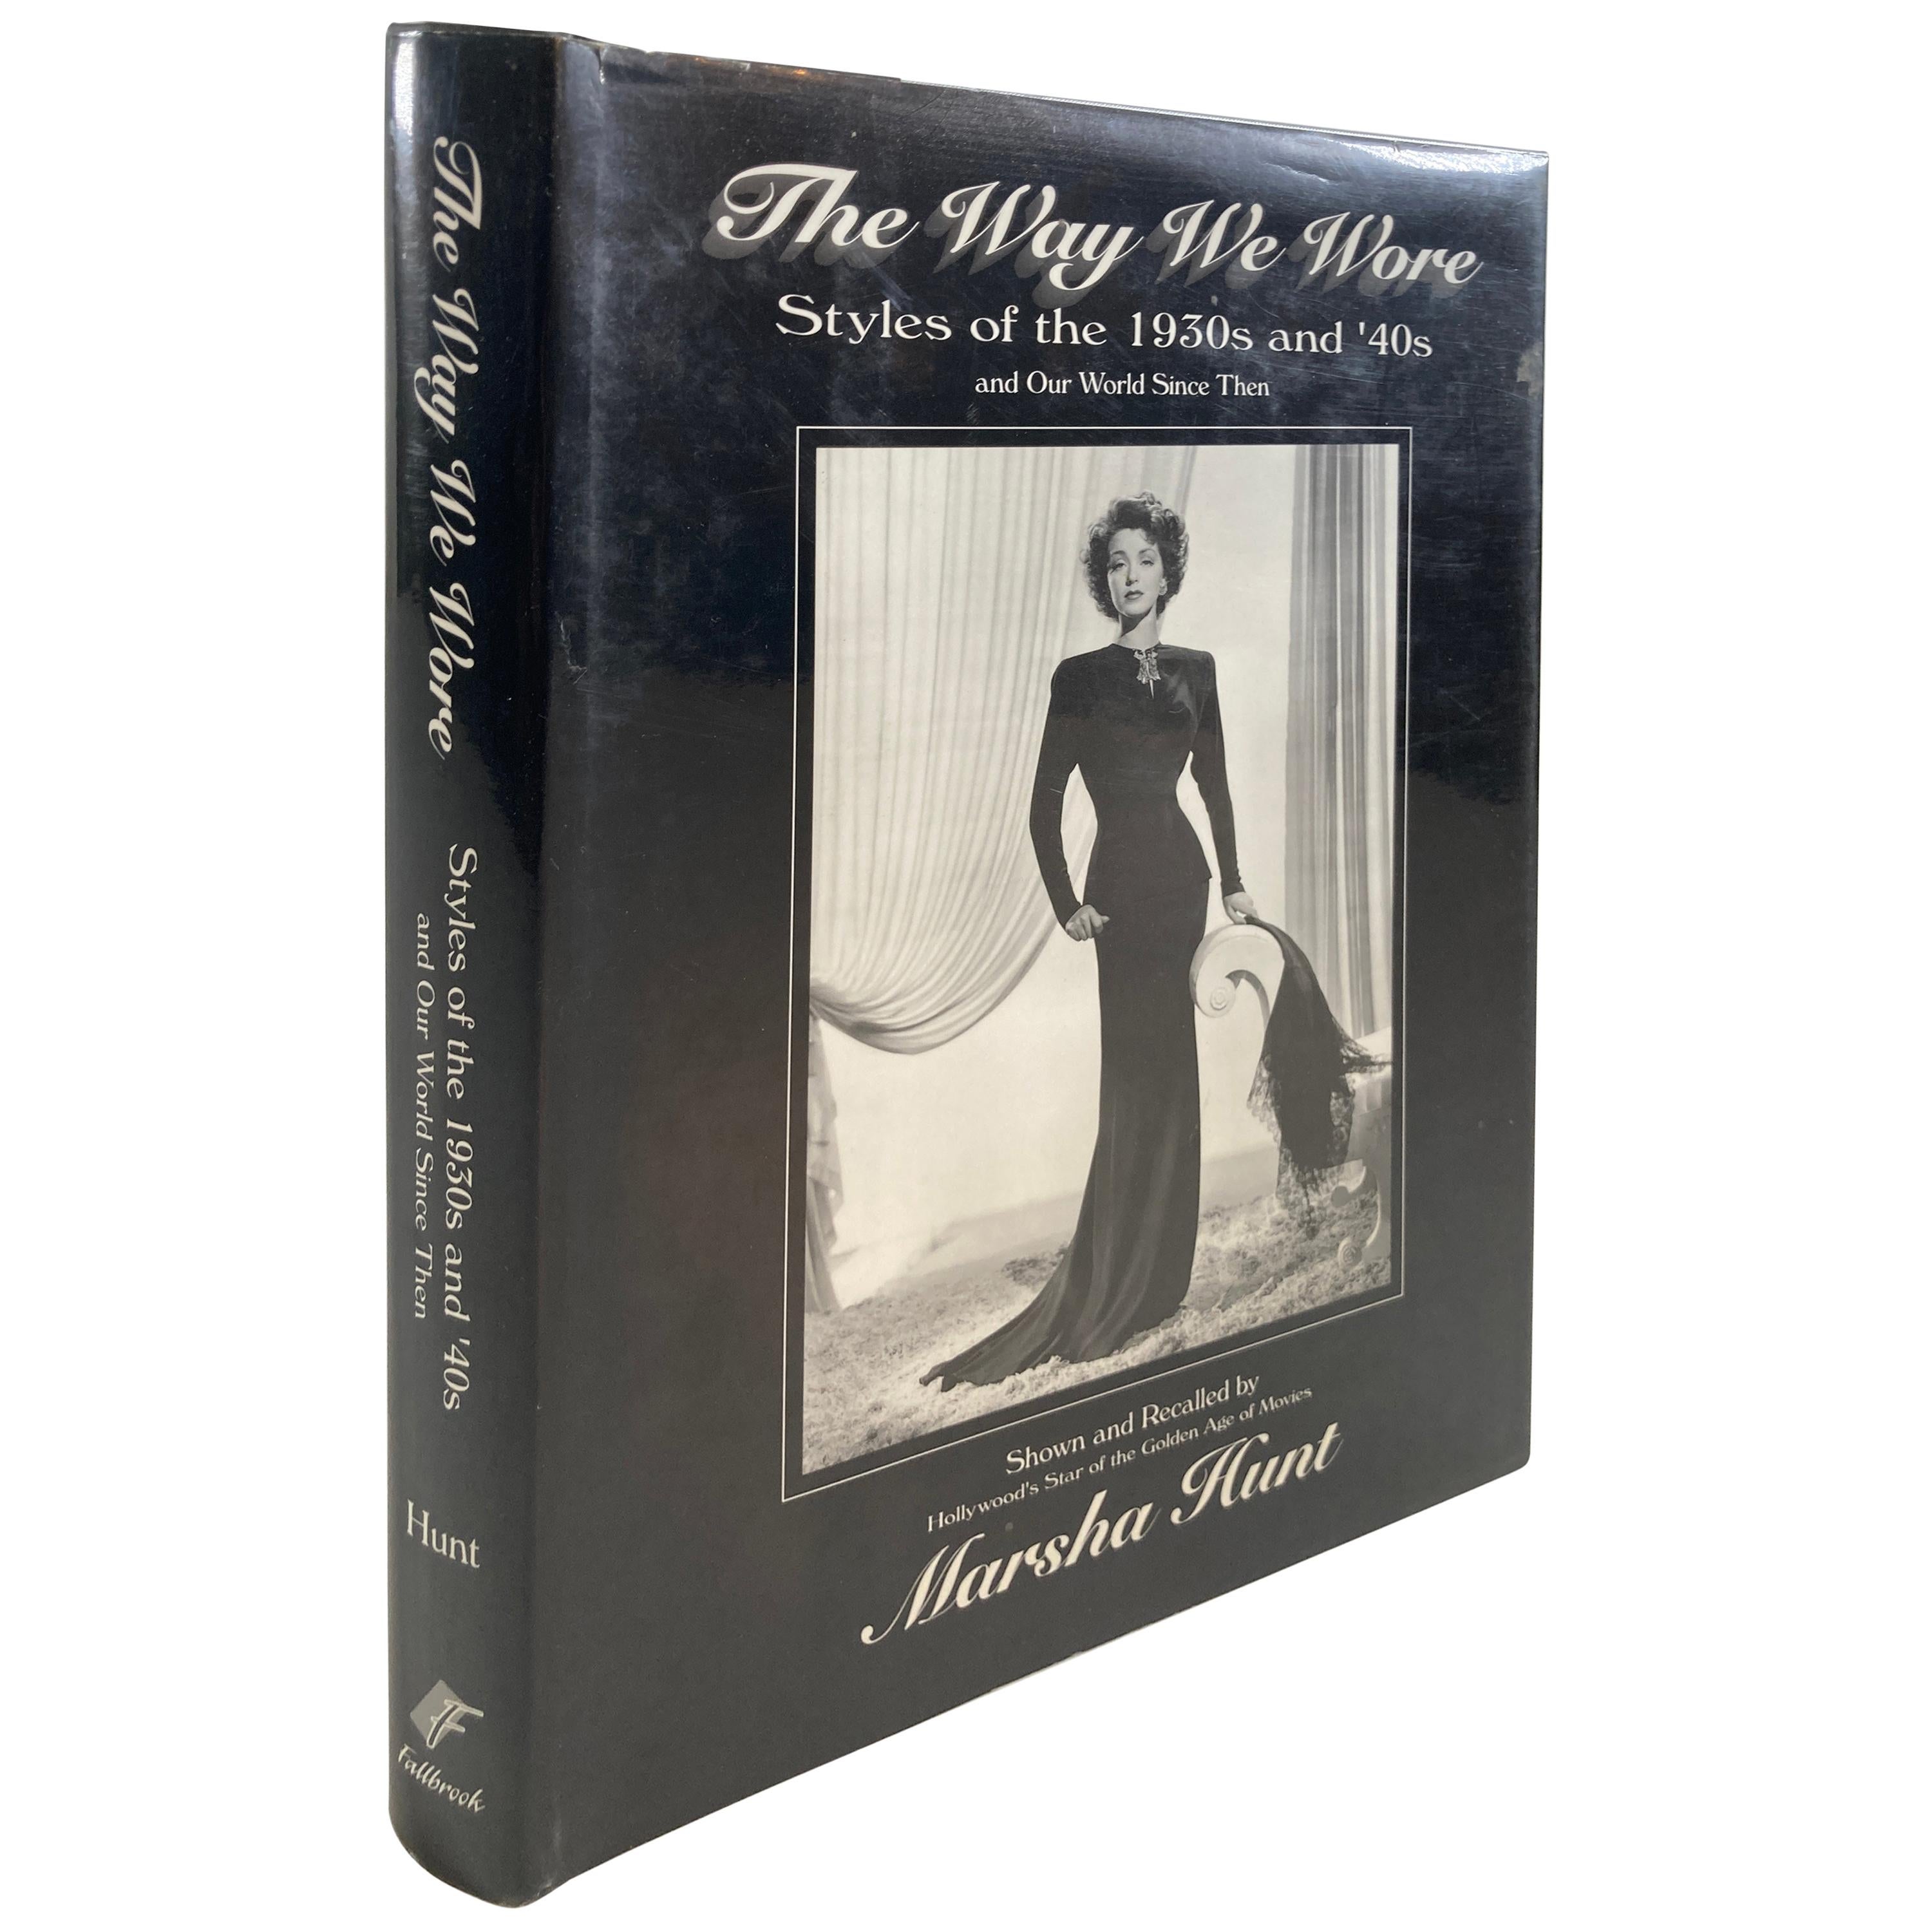 "The Way We Wore Styles of the 1930s and '40s" Book by Marsha Hunt